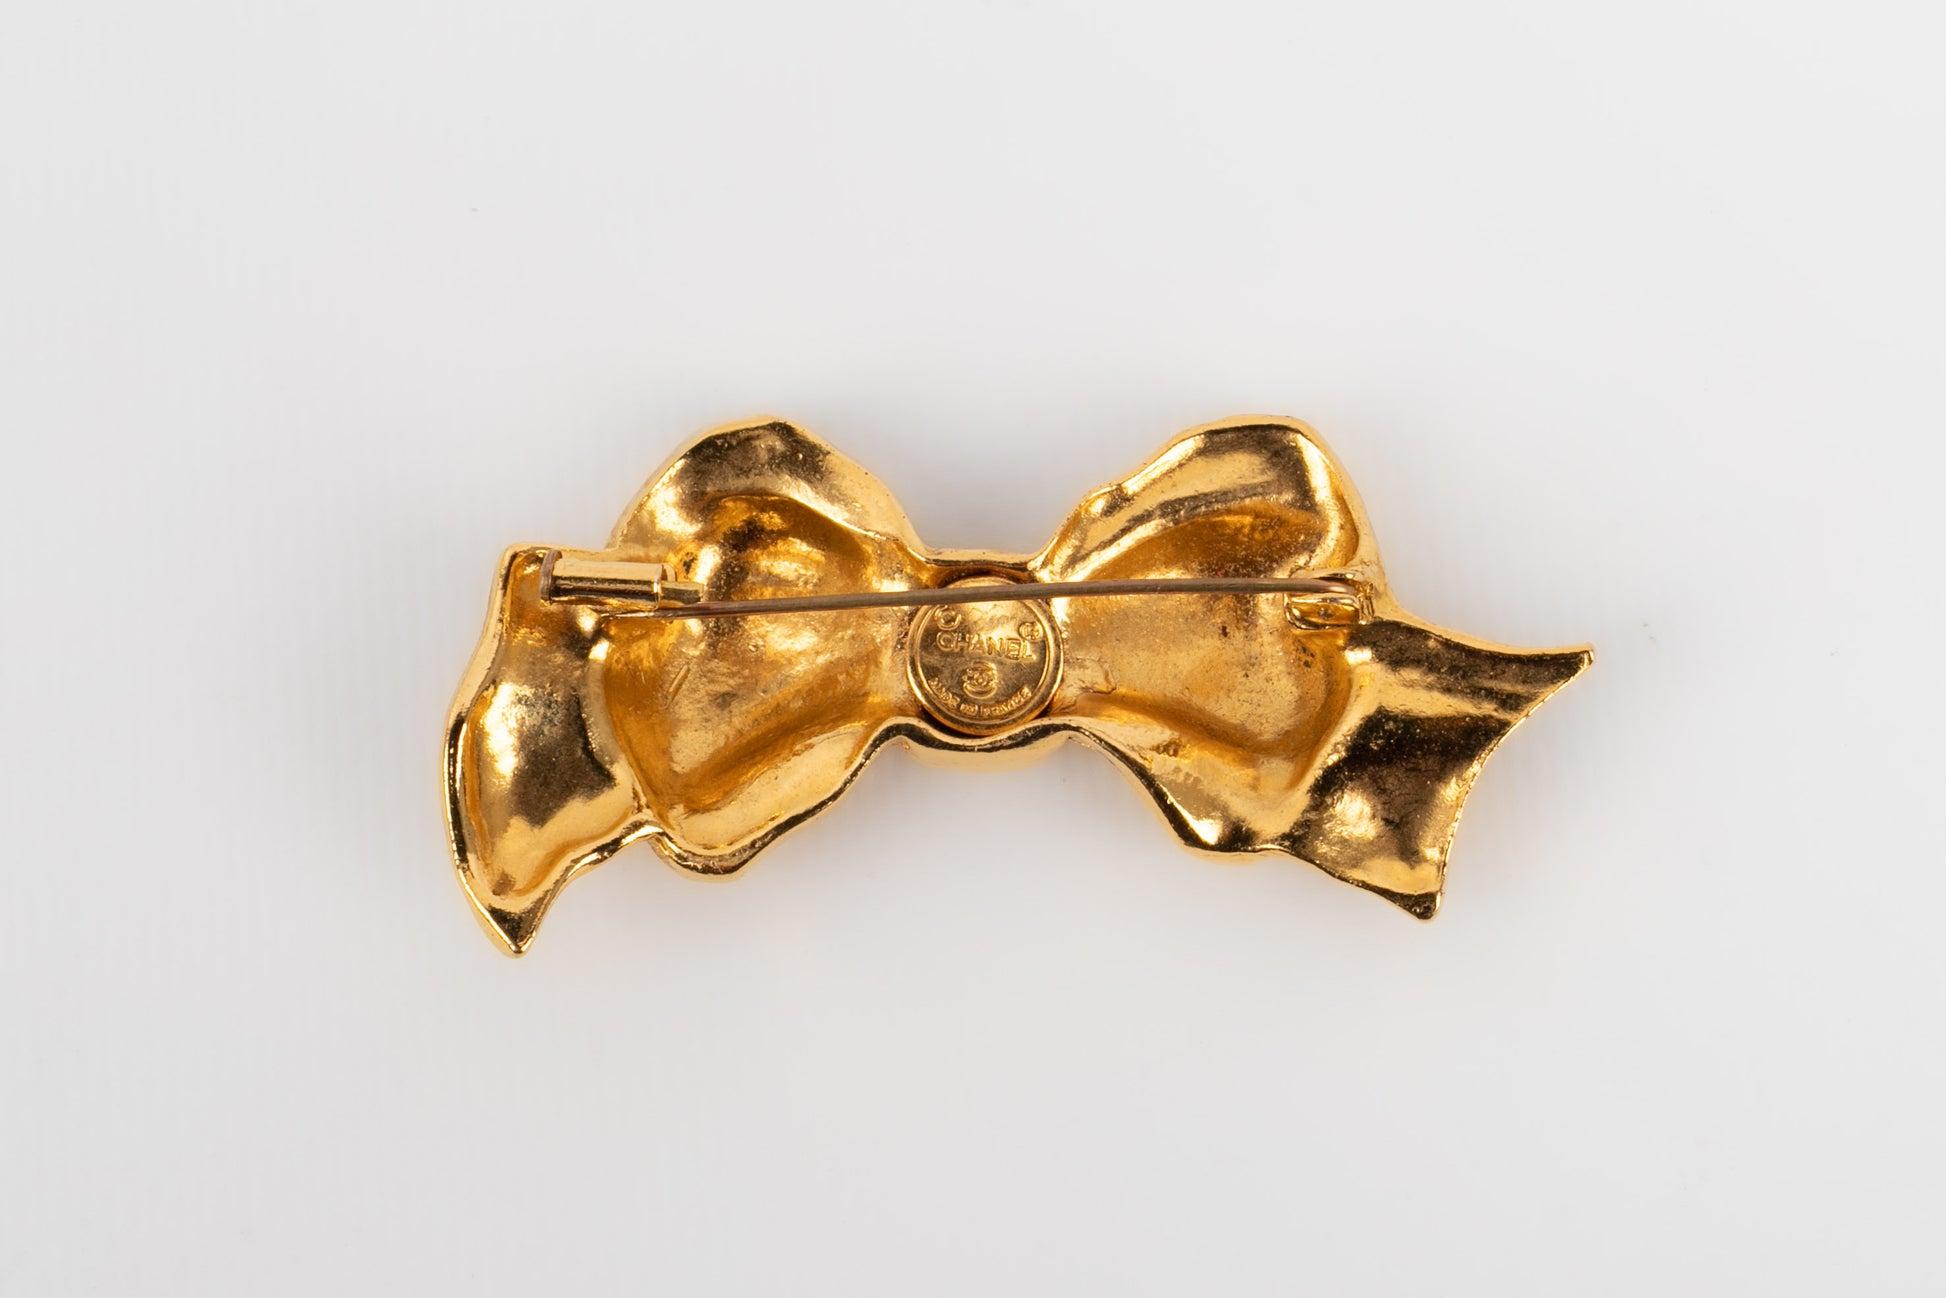 Chanel - (Made in France) Brooch in gold-plated metal representing a bow. Jewelry from the beginning of the 1990s.

Additional information:
Condition: Very good condition
Dimensions: 6.5 cm x 3 cm
Period: 20th Century

Seller Reference: BRB78